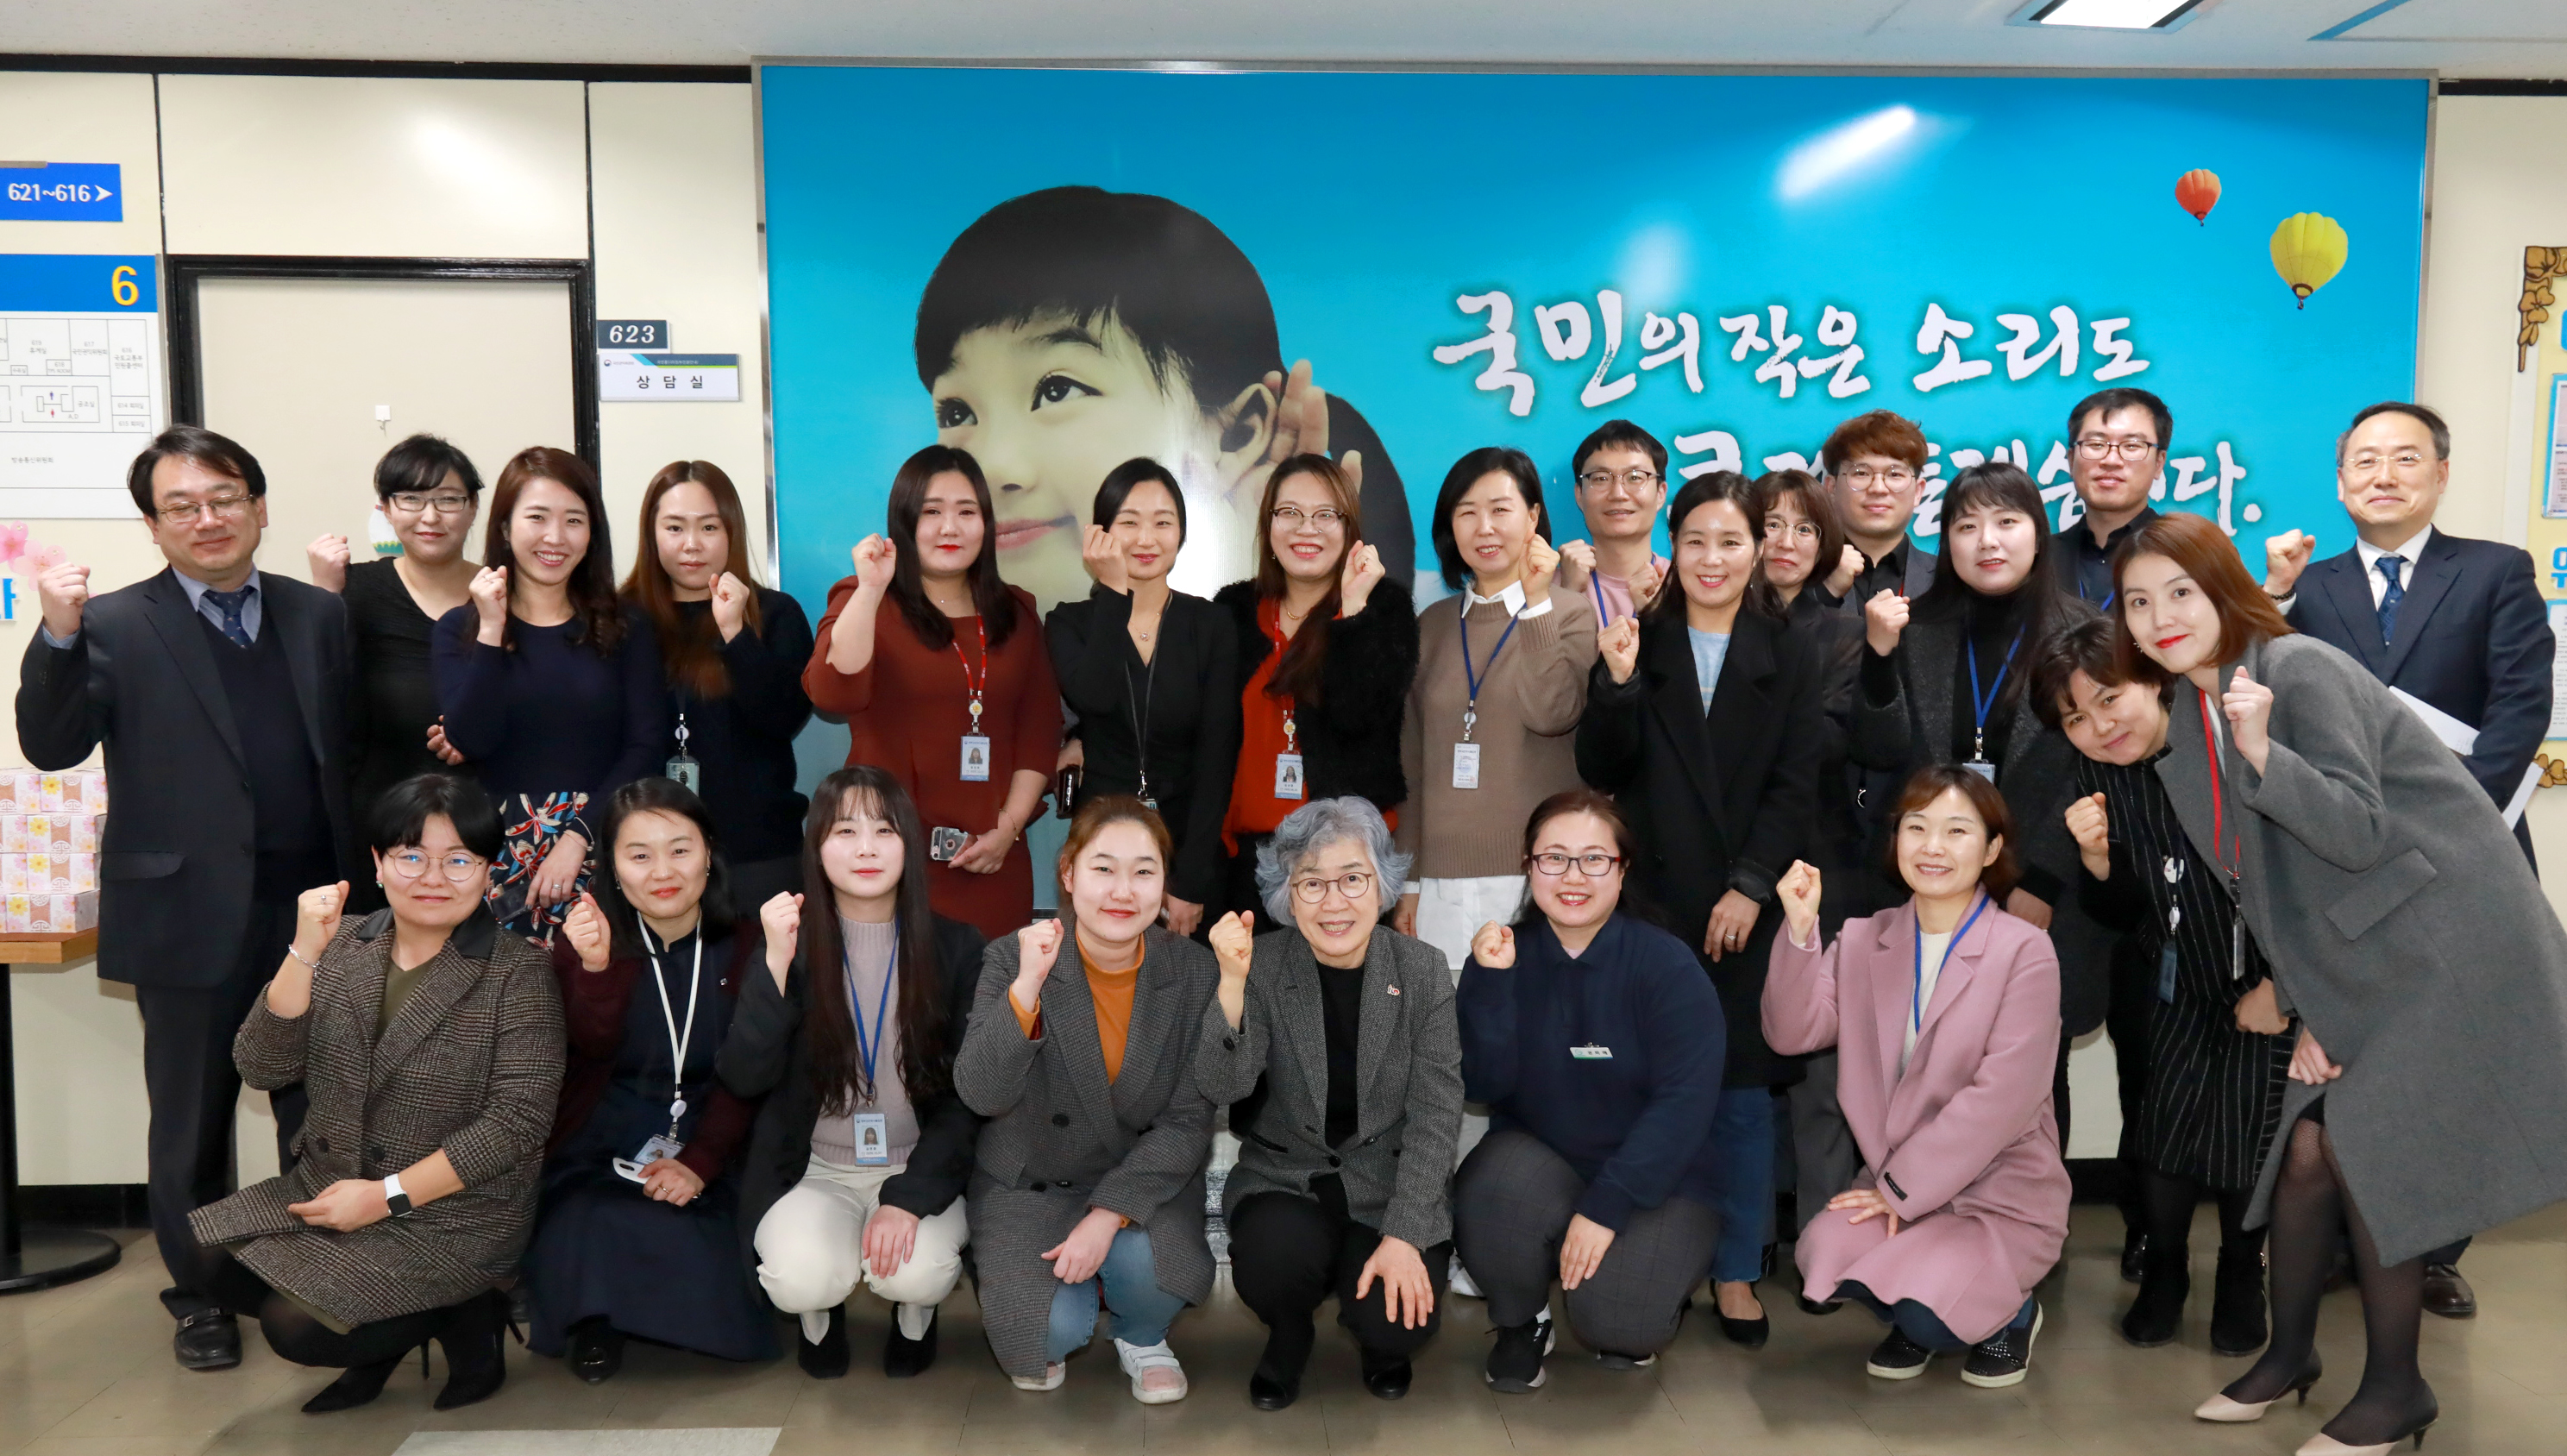 ACRC Chairperson Pak Un Jong visited the office of Government Call Center 110 in Gwacheon-si, Gyoenggi-do Provincetkwls